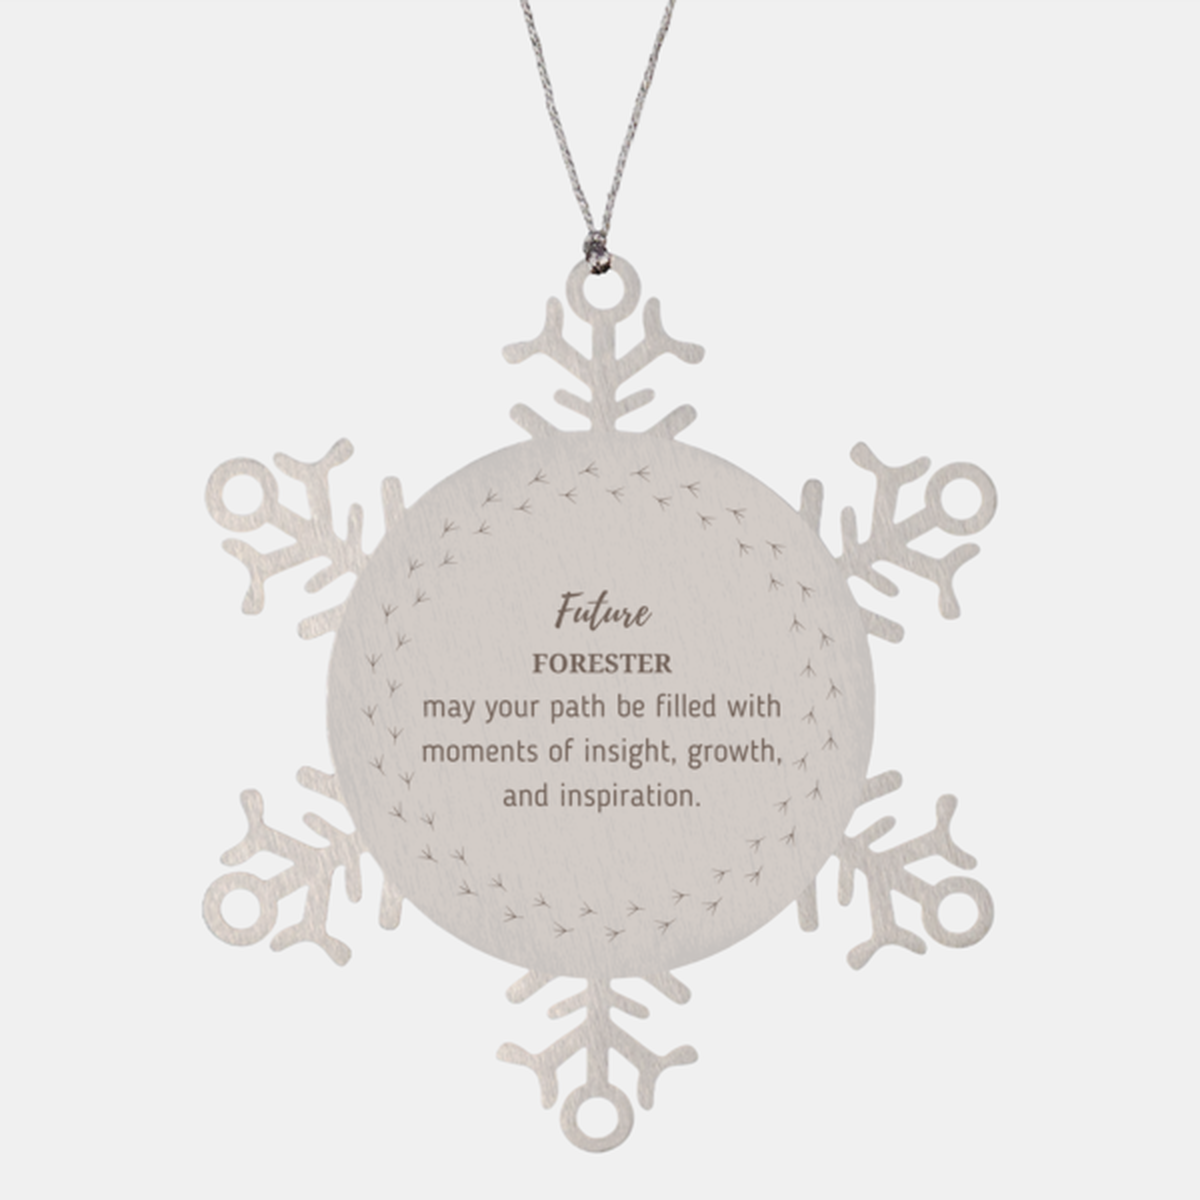 Future Forester Gifts, May your path be filled with moments of insight, Graduation Gifts for New Forester, Christmas Unique Snowflake Ornament For Men, Women, Friends